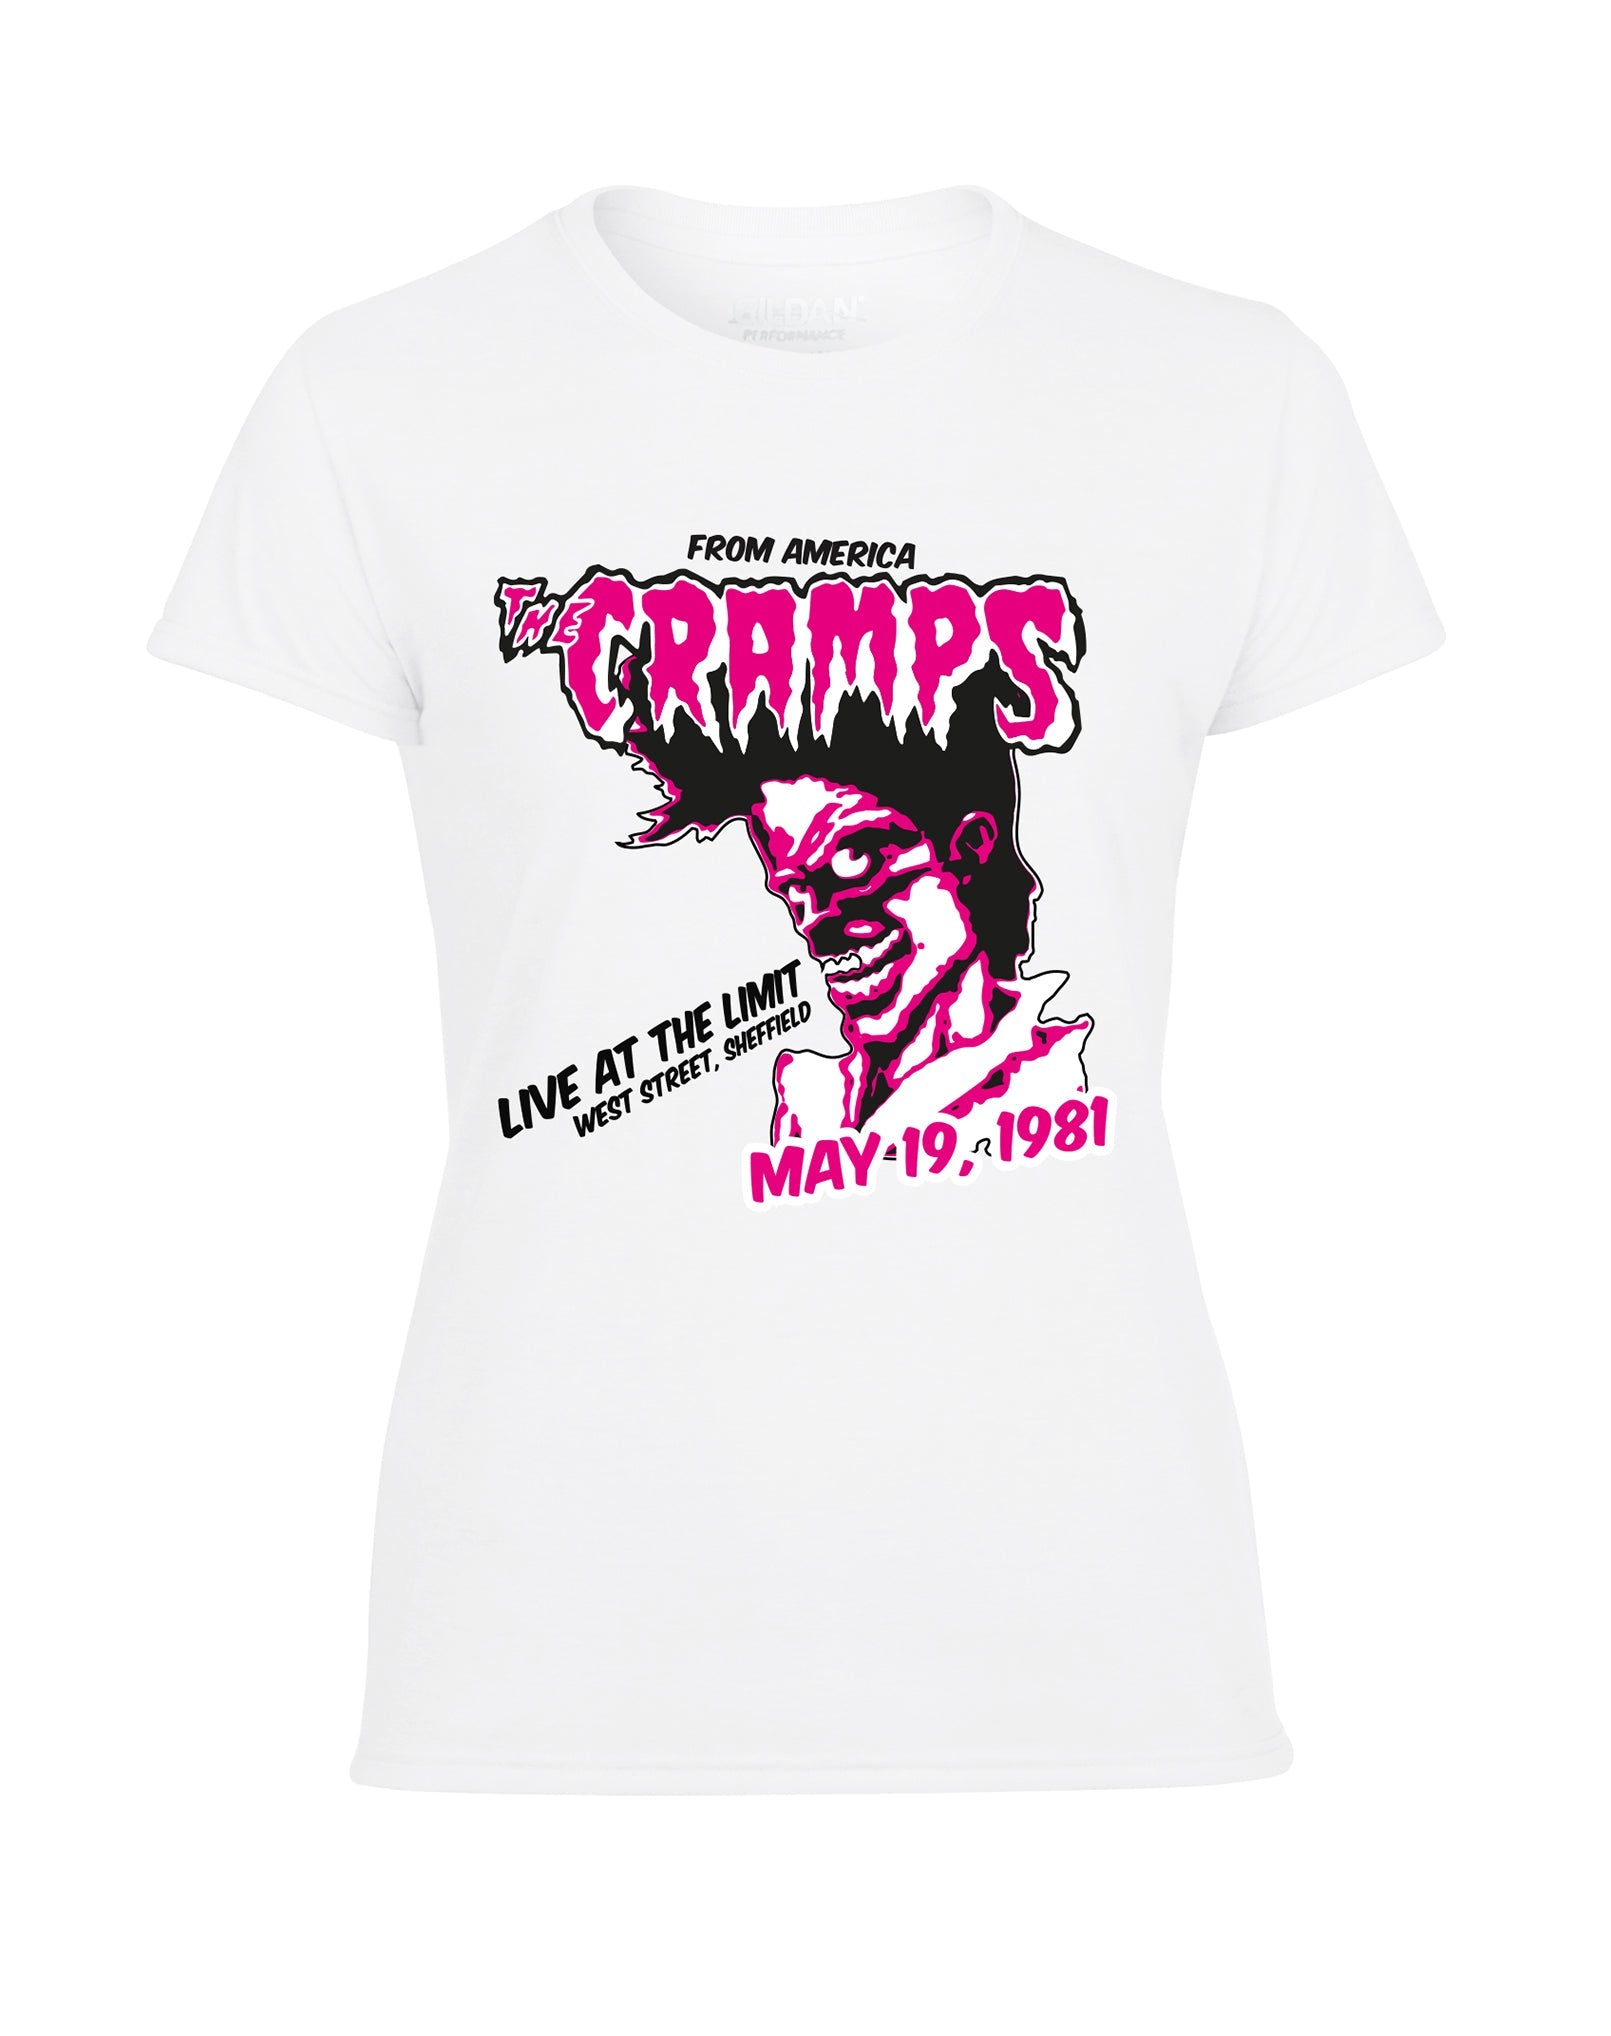 The Cramps at The Limit ladies fit t-shirt- various colours - Dirty Stop Outs